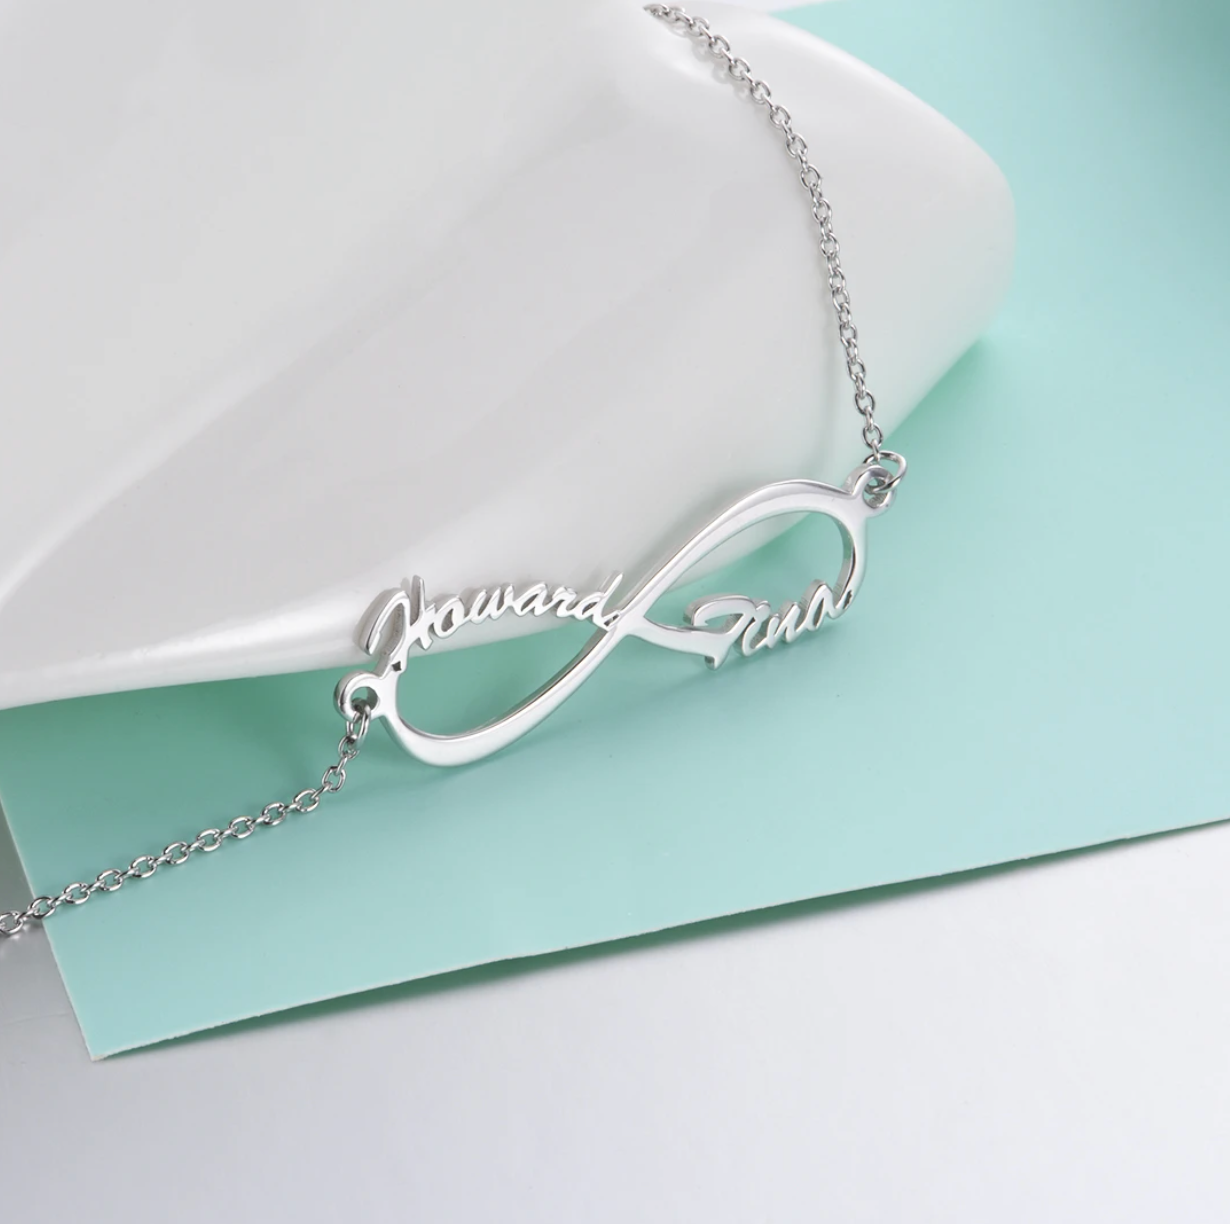 Personalized Silver Plated Infinity Name Necklace (Features two names)